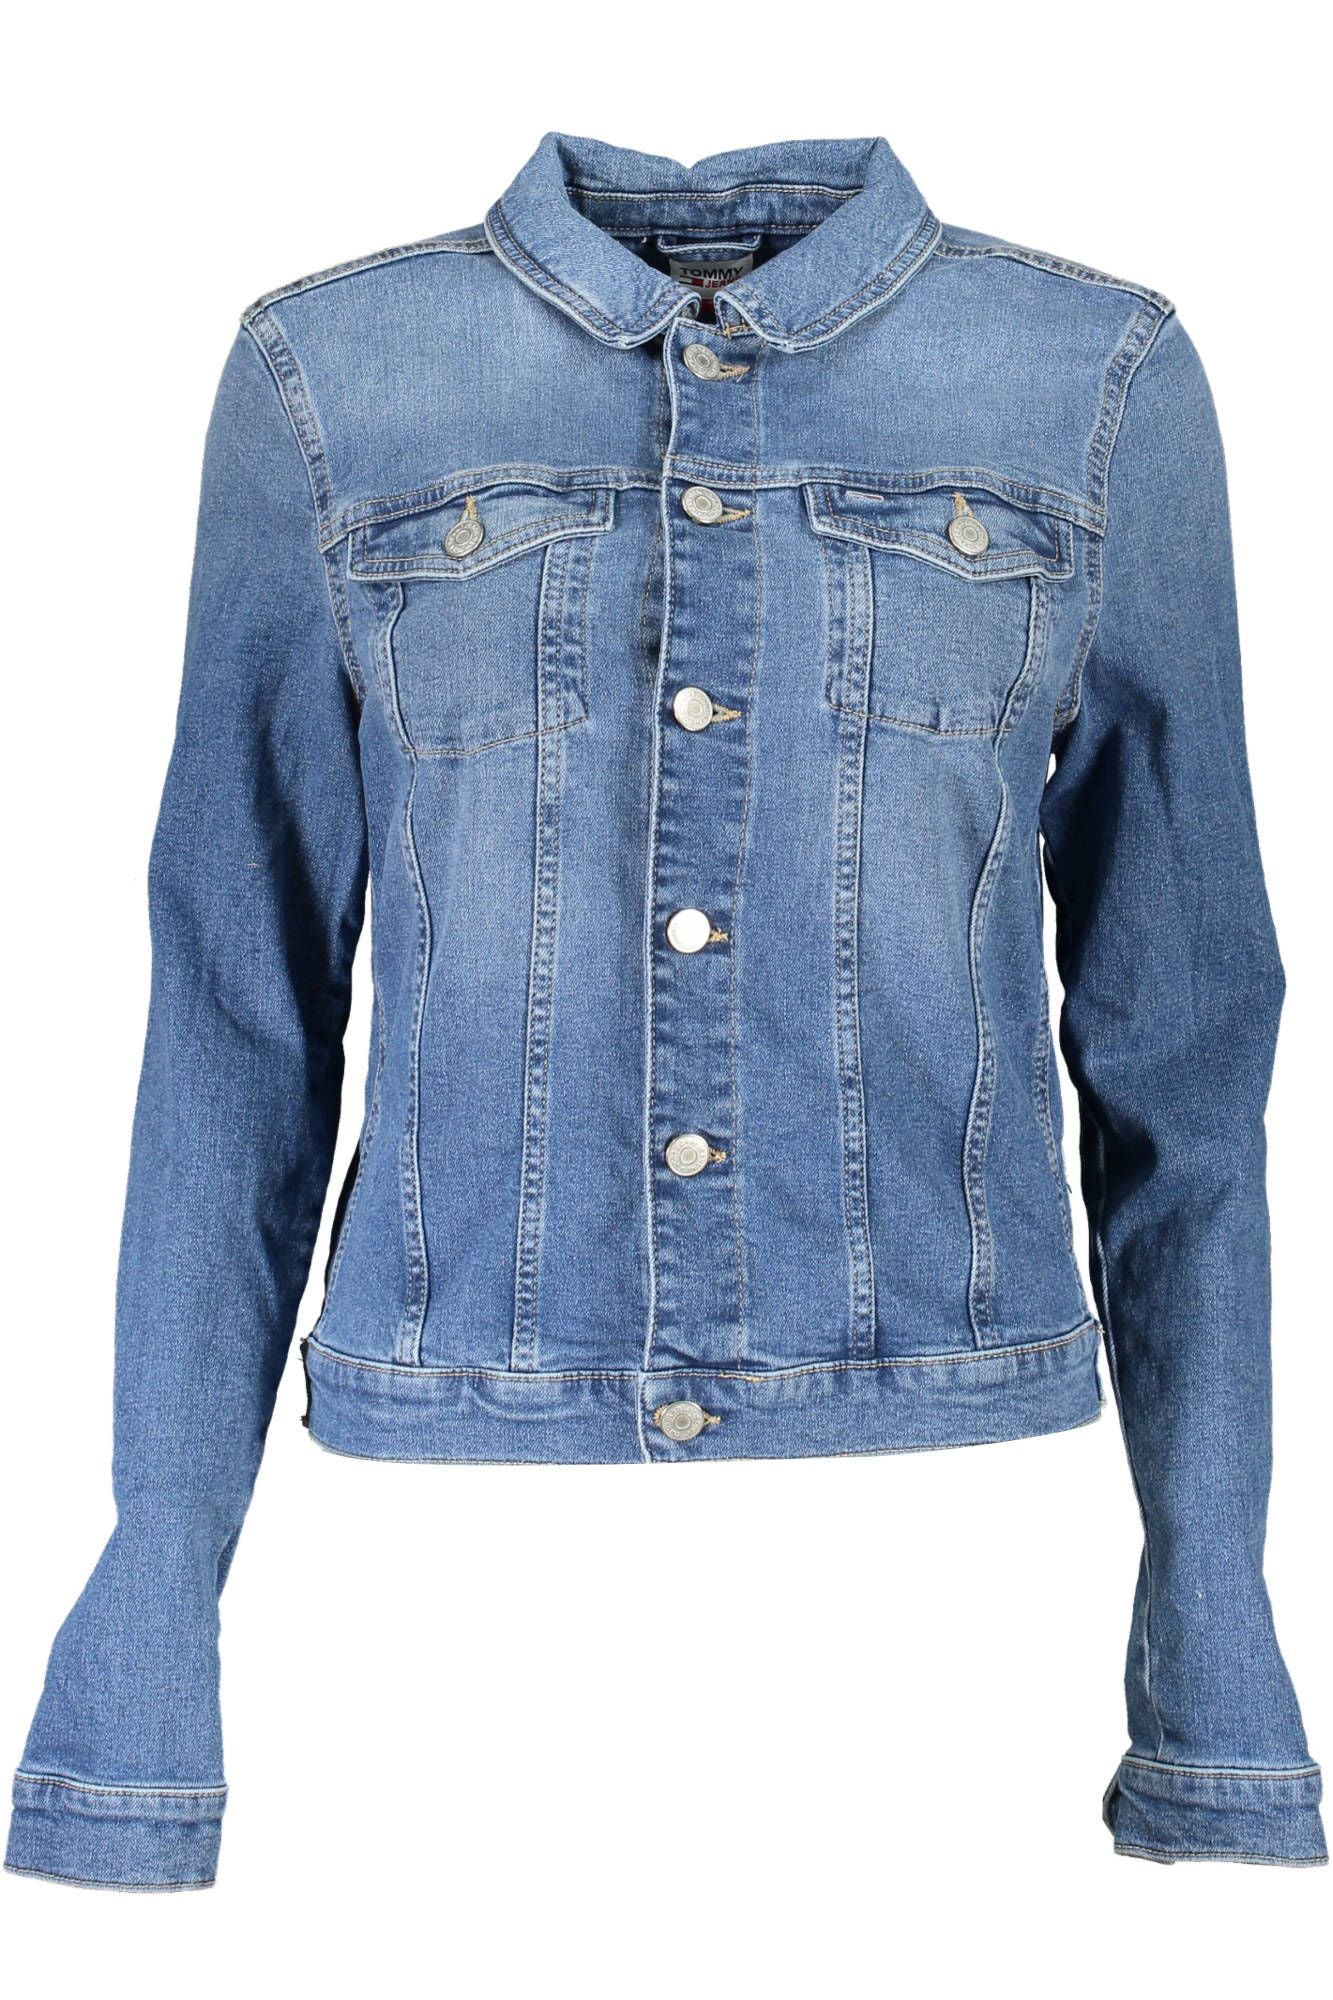 Chic Denim Long Sleeve Jacket with Embroidery